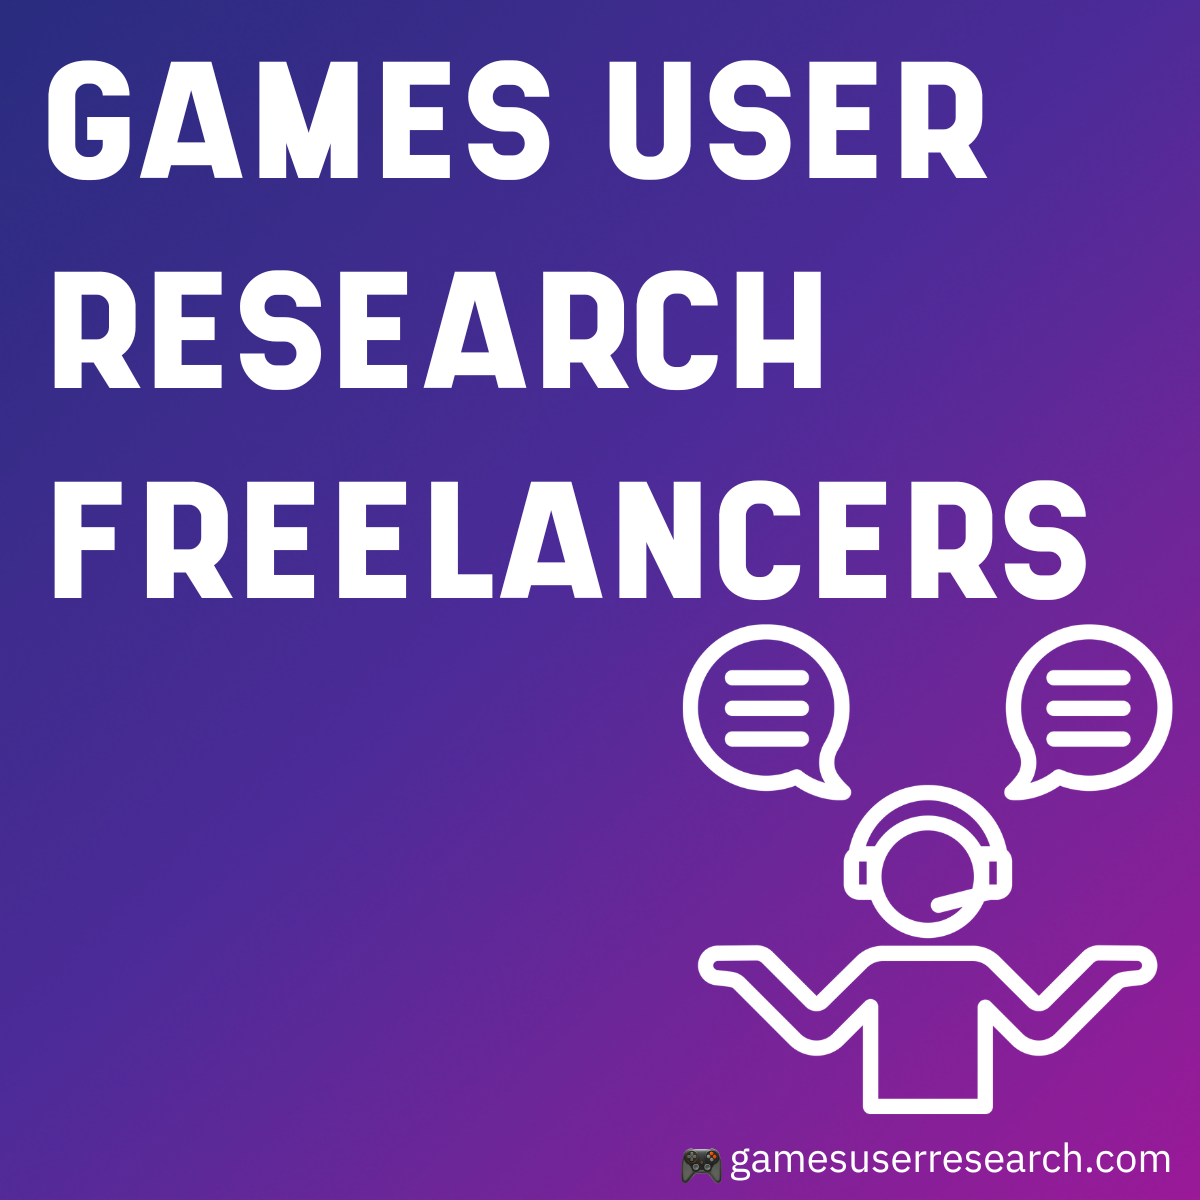 Games User Research Freelancers